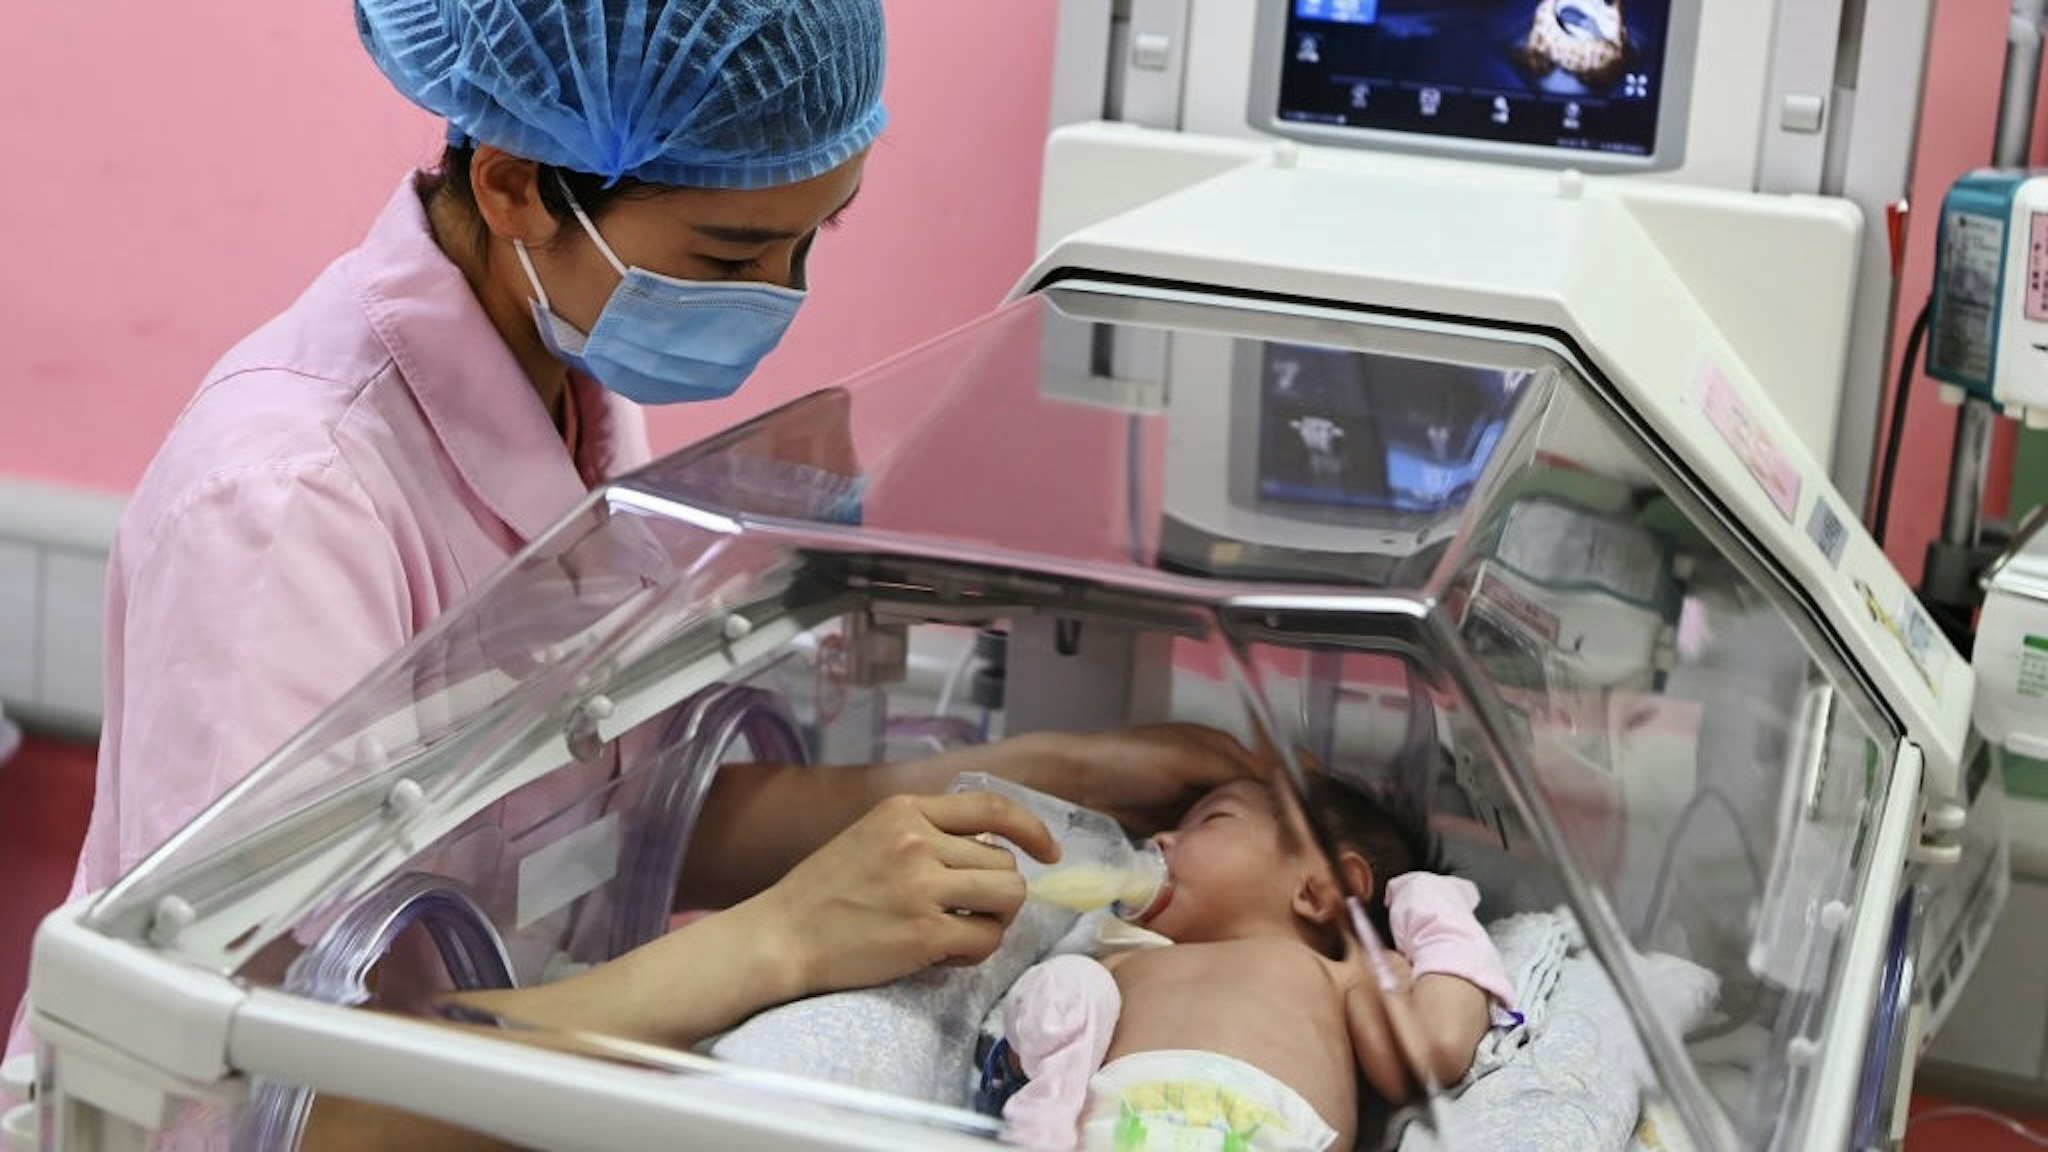 International Nurses Day Marked In China CHENGDU, CHINA - MAY 11: A nurse feeds milk to a newborn baby at a hospital on May 11, 2021 in Chengdu, Sichuan Province of China. International Nurses Day is observed annually on May 12. (Photo by An Yuan/China News Service via Getty Images) China News Service / Contributor